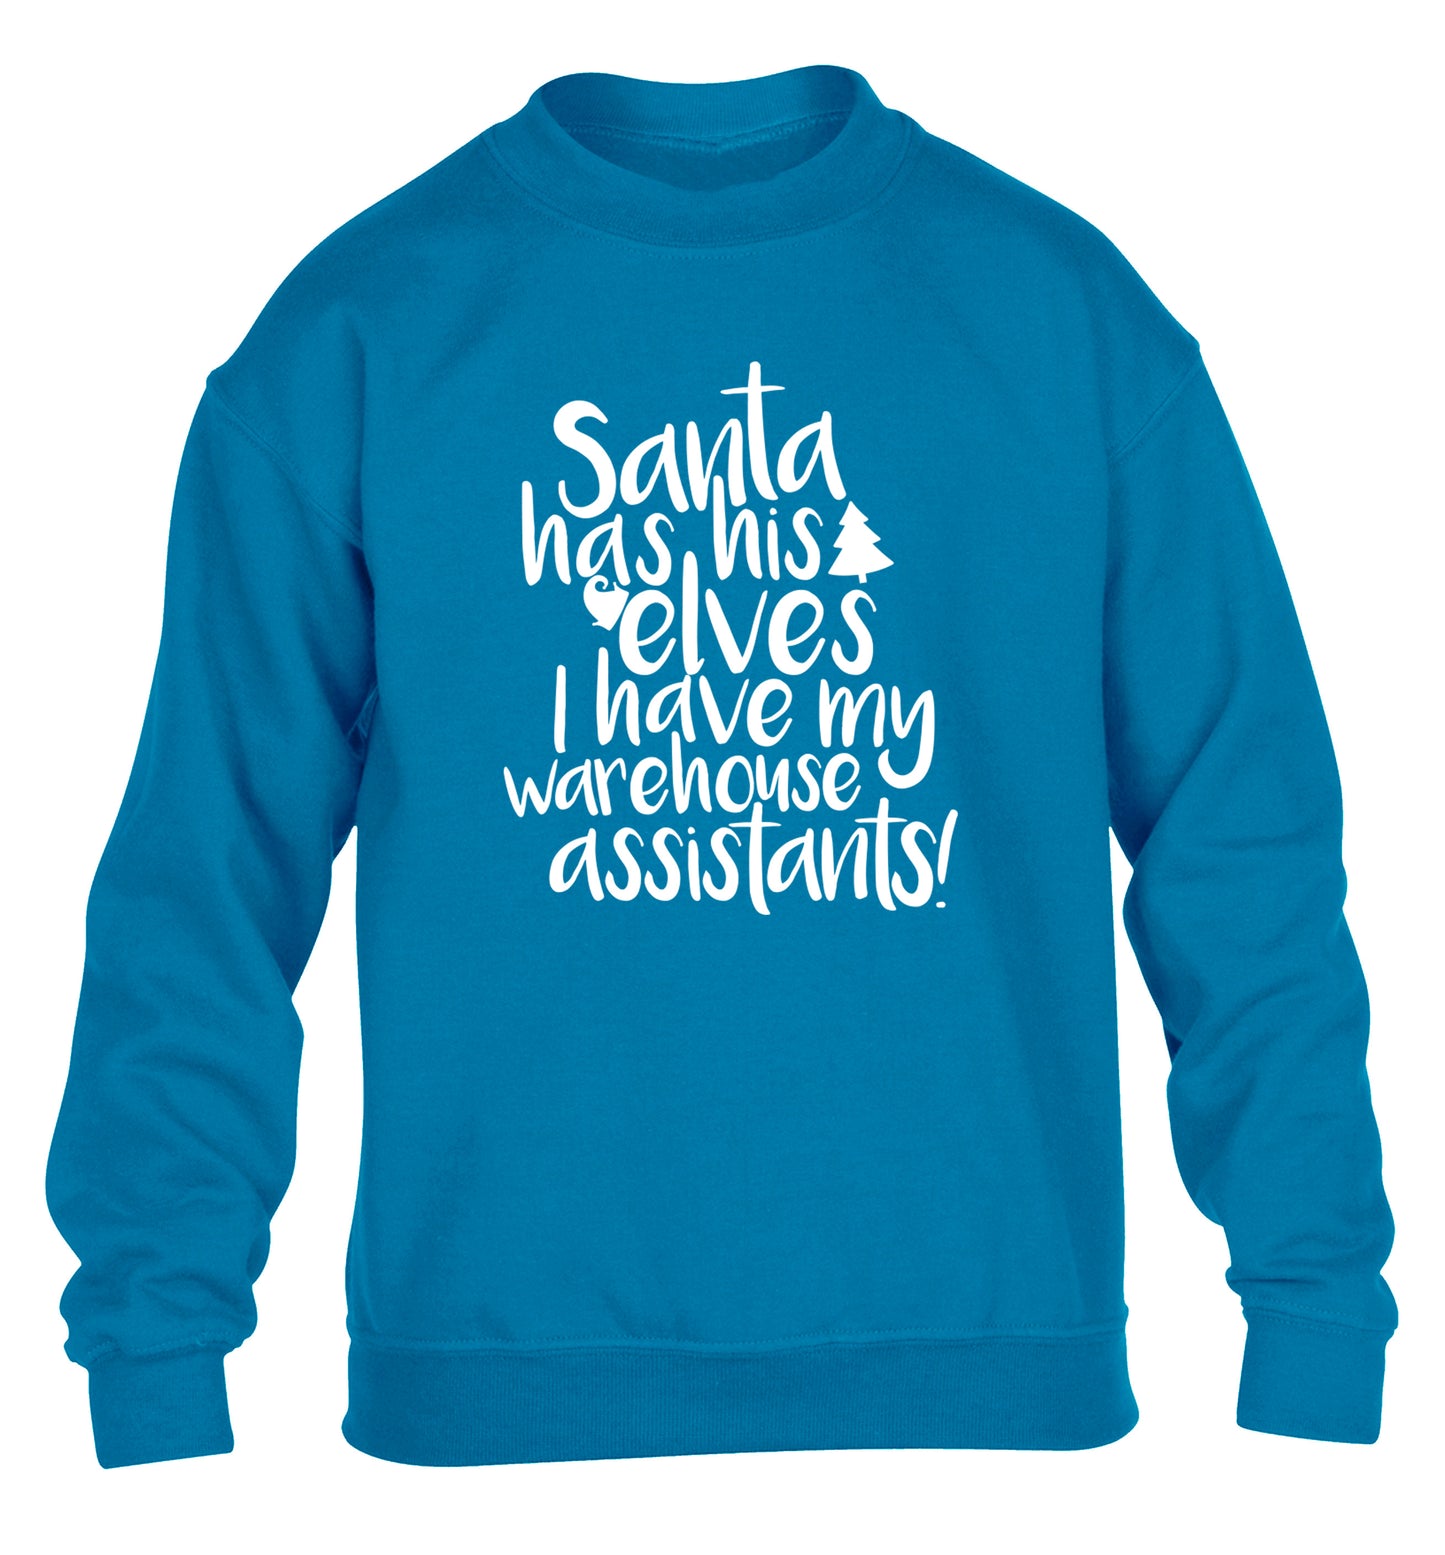 Santa has his elves I have my warehouse assistants children's blue sweater 12-14 Years